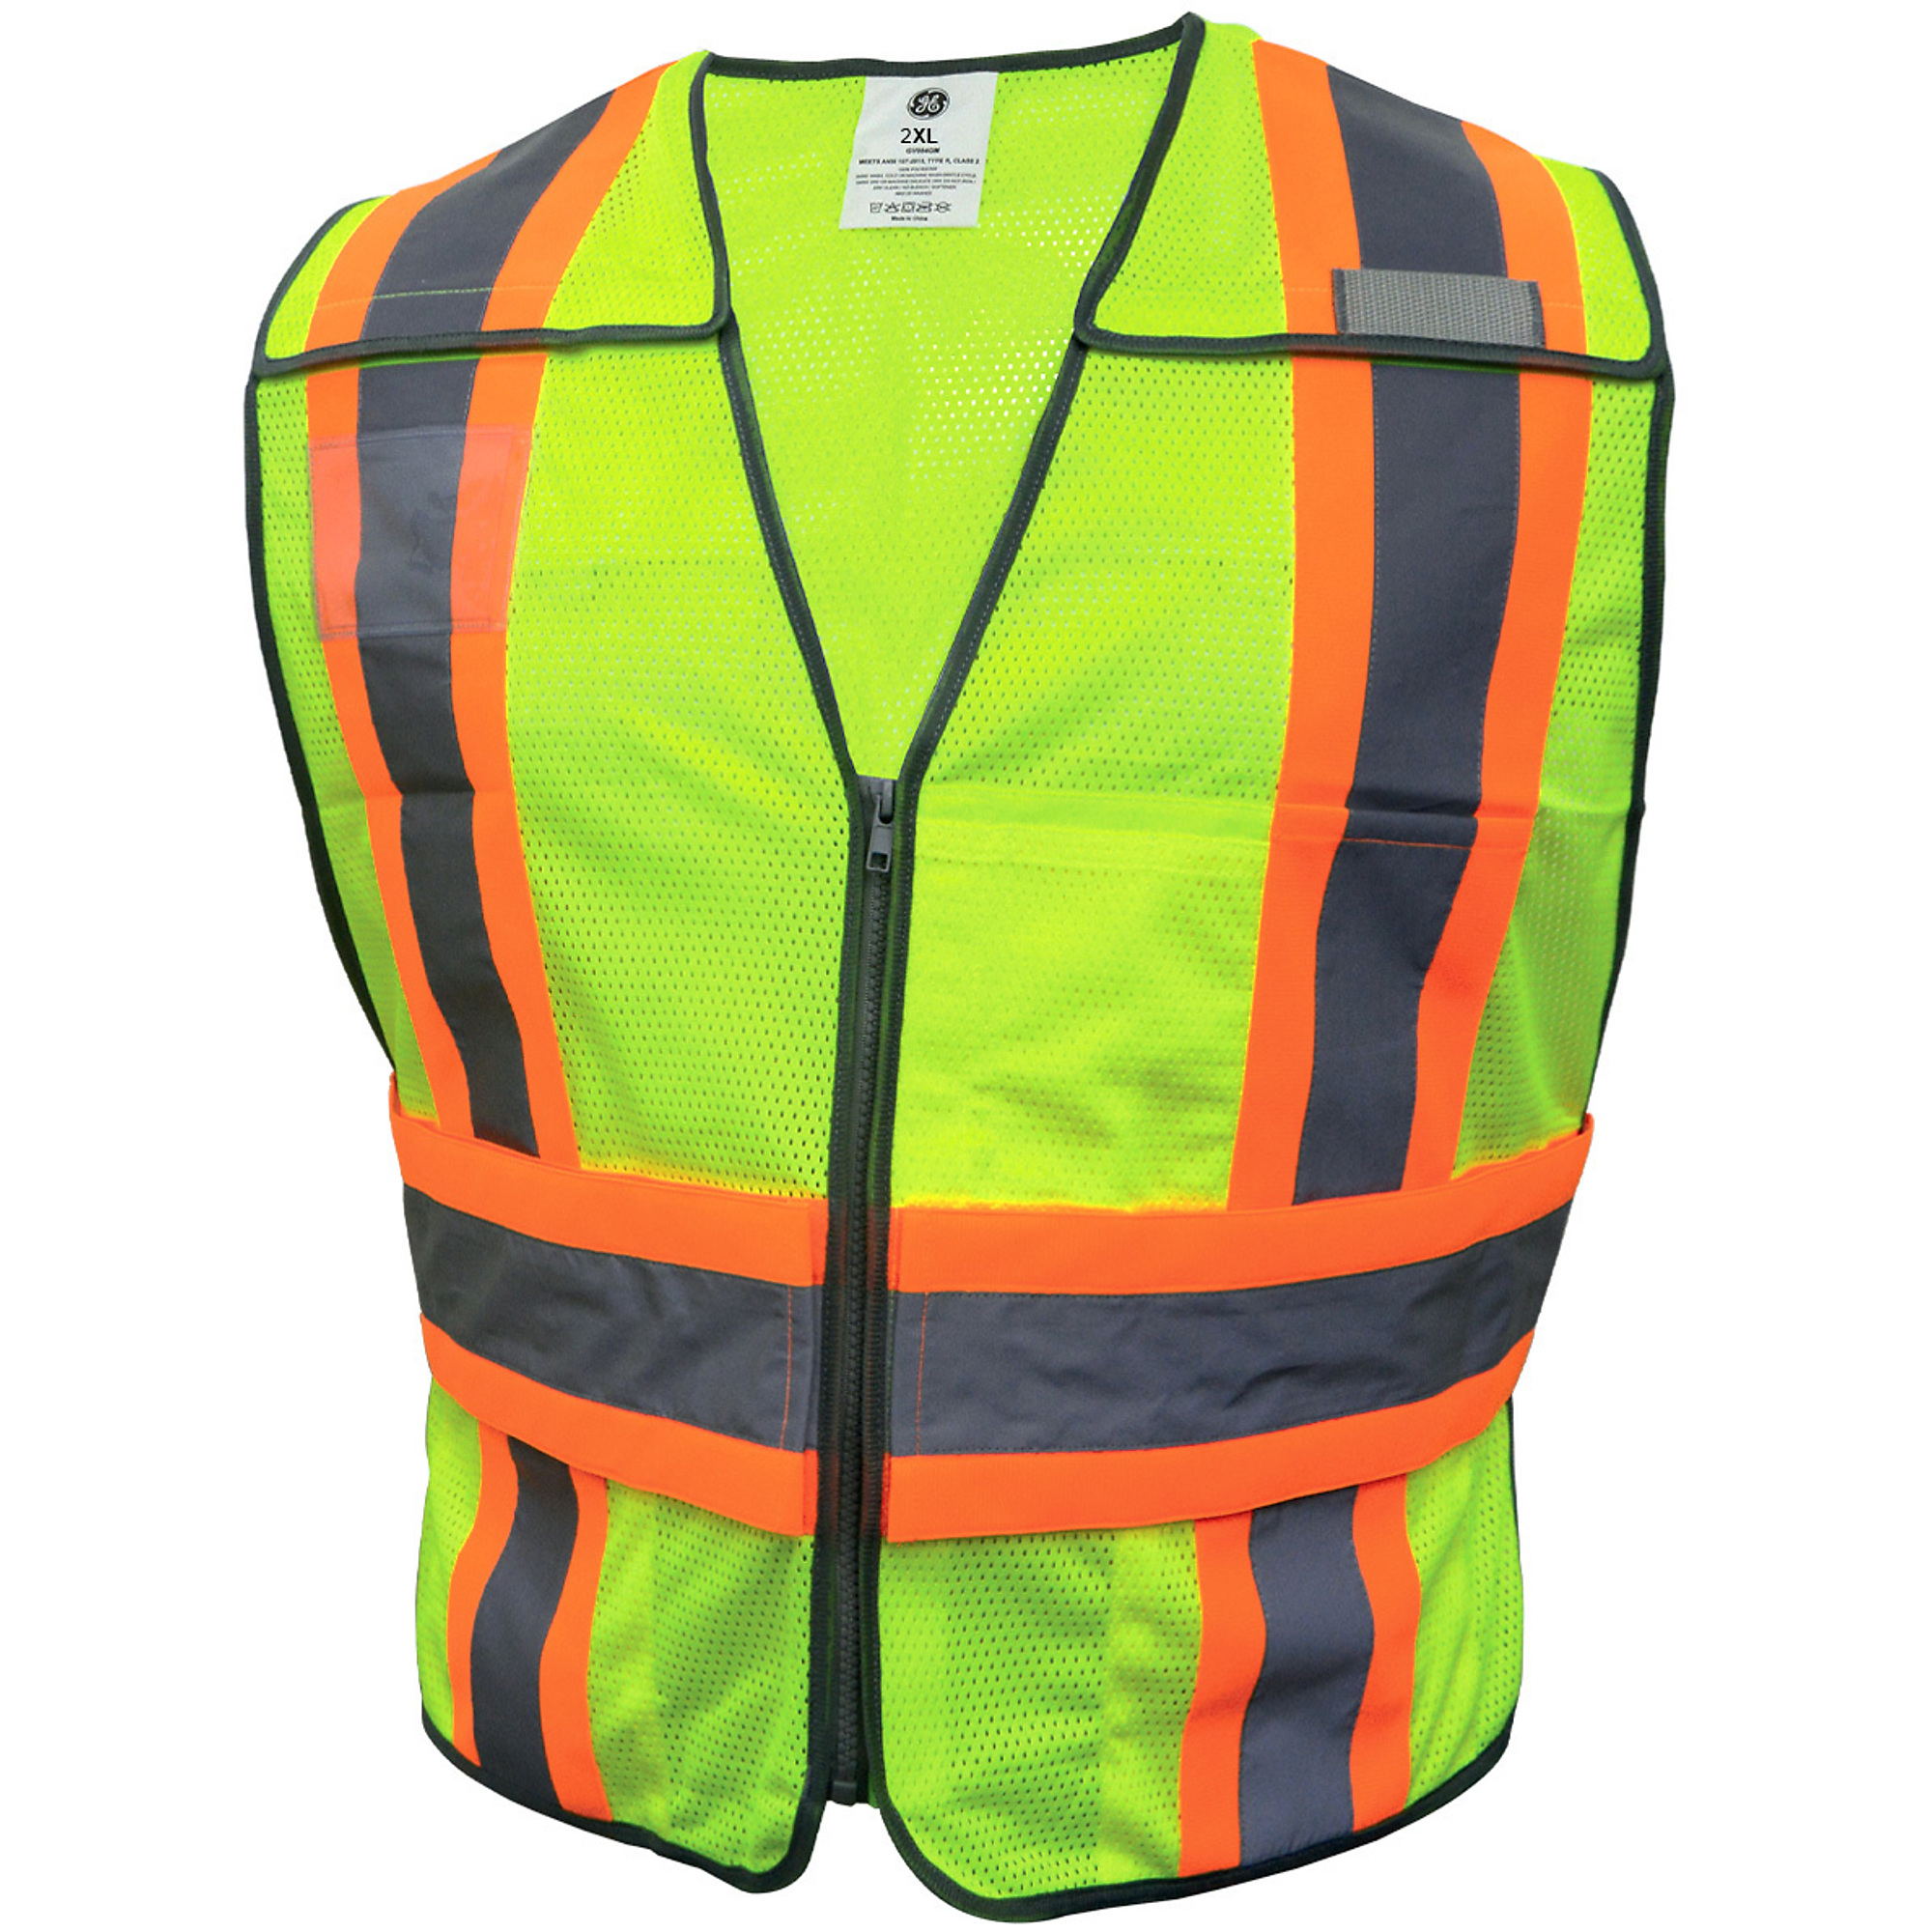 General Electric, Green Expandable 5 Point Breakaway Vest 2XL, Size 2XL, Color GREEN, Model GV084G2XL